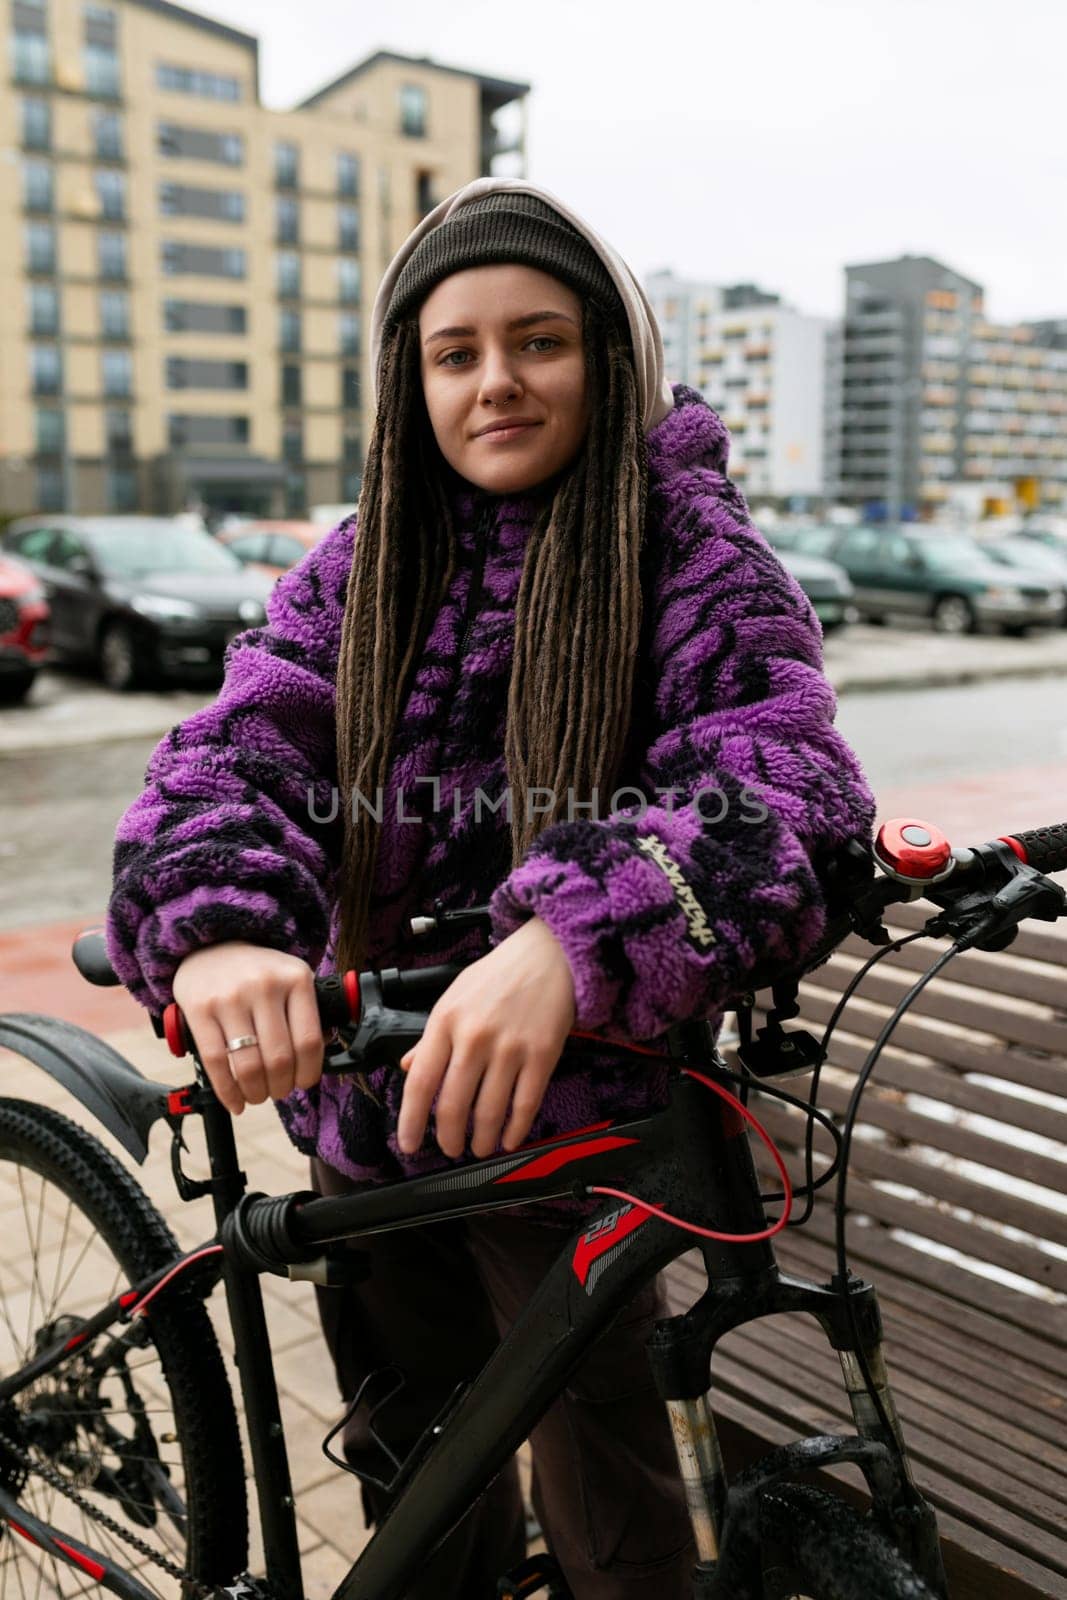 Healthy lifestyle concept. A woman with dreadlocks and piercings is waiting for friends under the entrance with a bicycle.